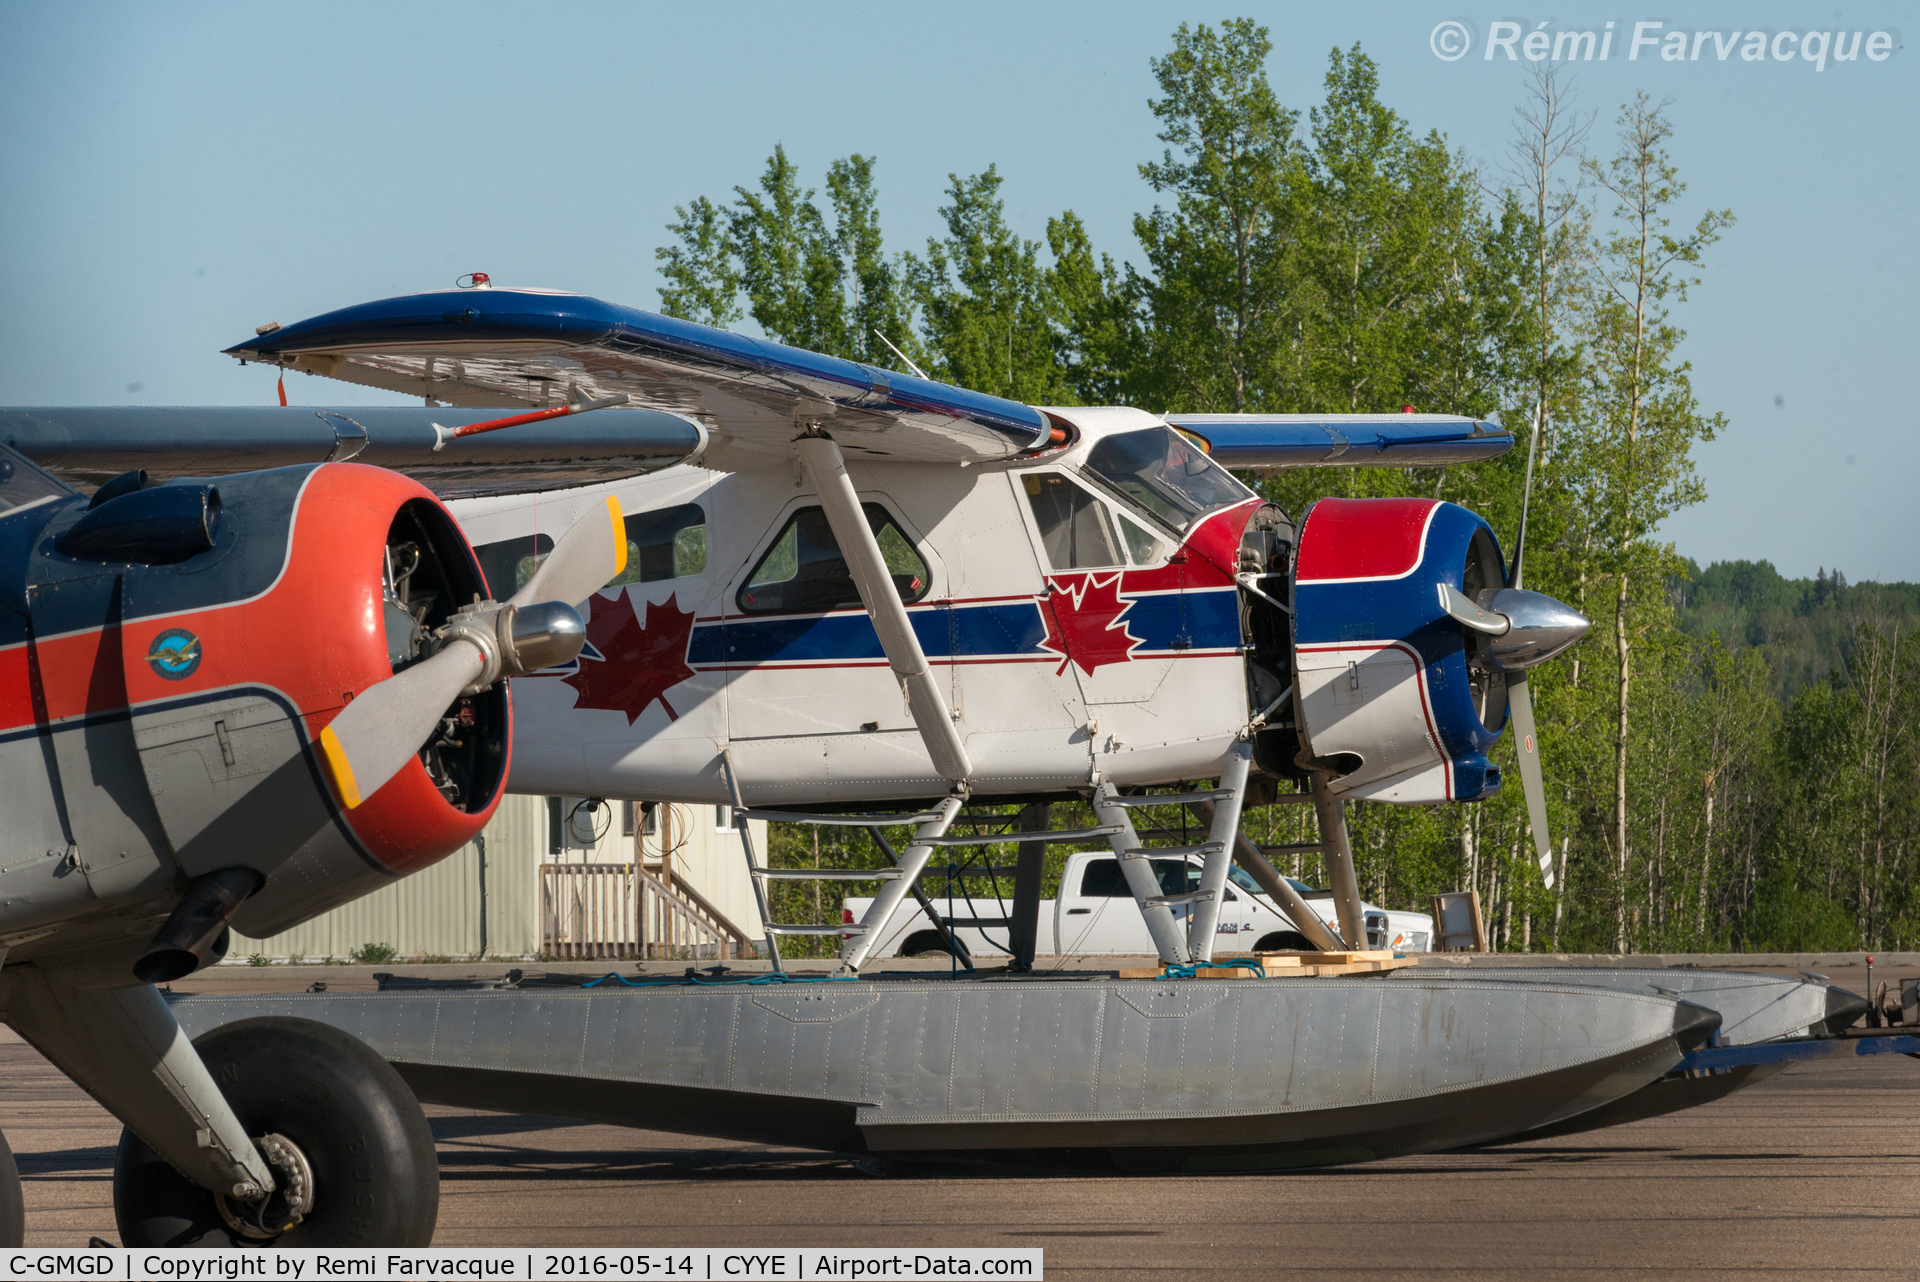 C-GMGD, 1954 De Havilland Canada DHC-2 Beaver Mk.1 C/N 519, Parked in front of private hanger, NE part of airport.